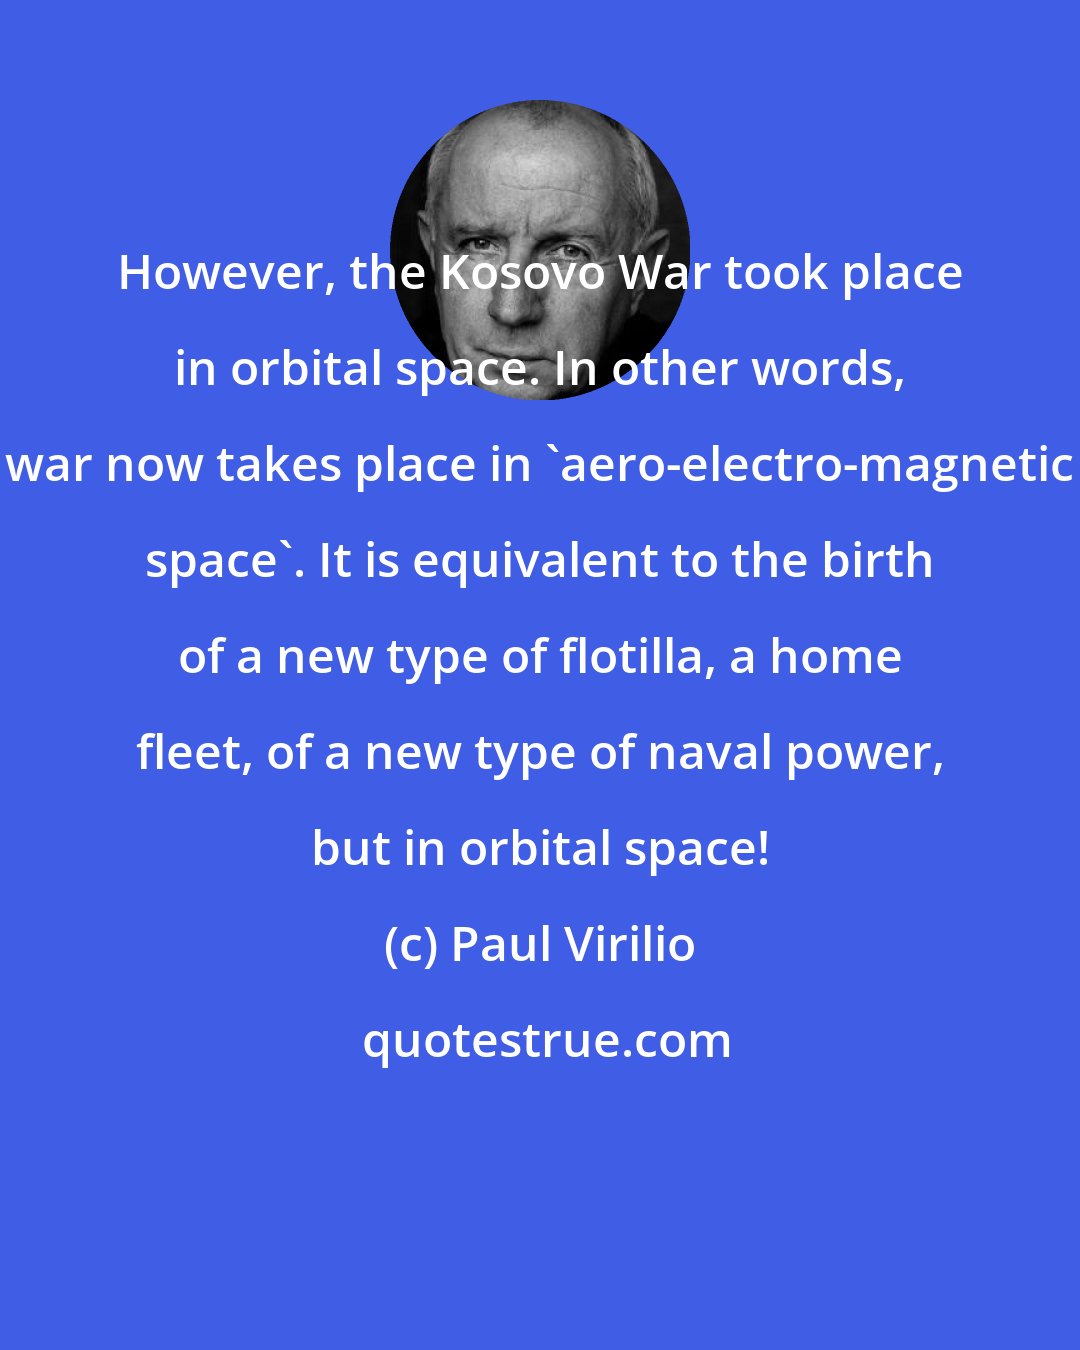 Paul Virilio: However, the Kosovo War took place in orbital space. In other words, war now takes place in 'aero-electro-magnetic space'. It is equivalent to the birth of a new type of flotilla, a home fleet, of a new type of naval power, but in orbital space!